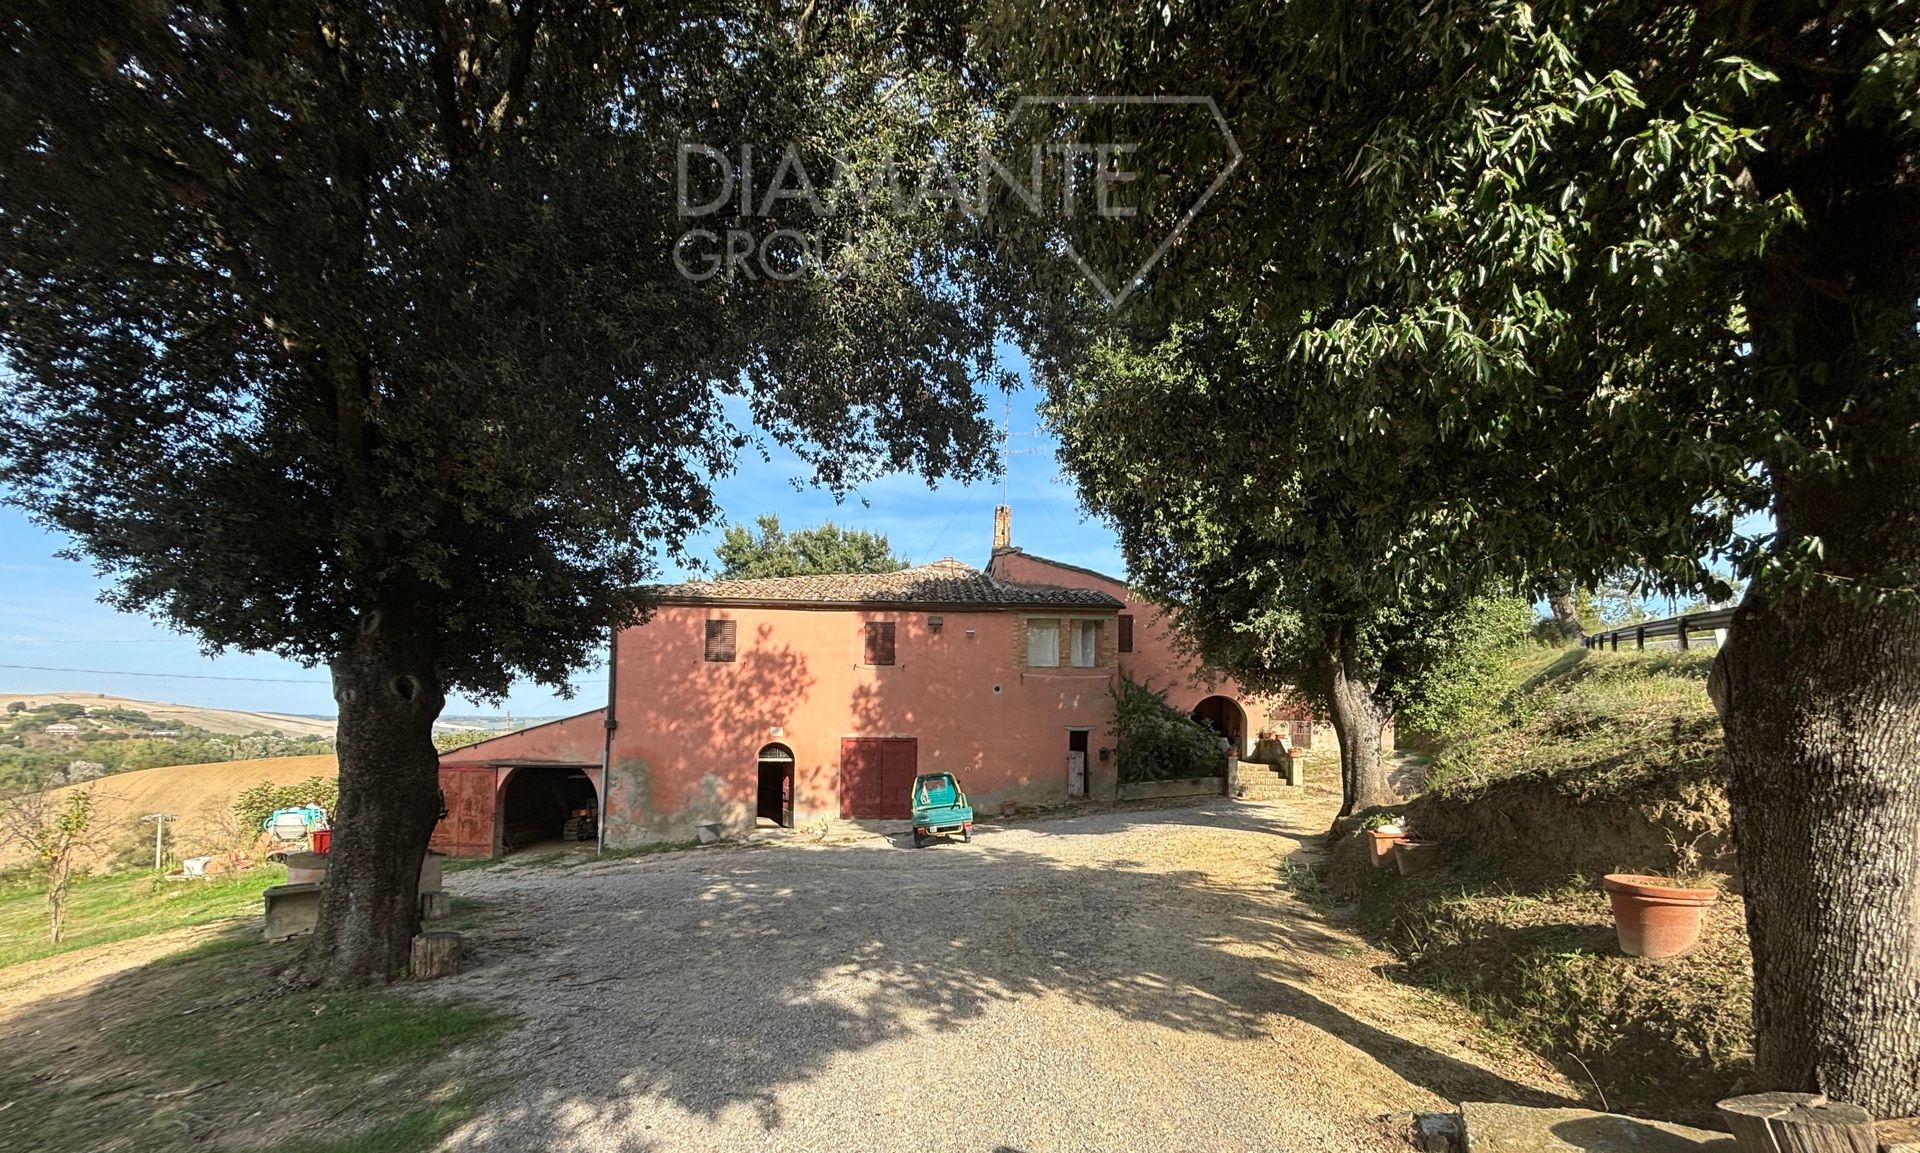 For sale cottage in quiet zone Montalcino Toscana